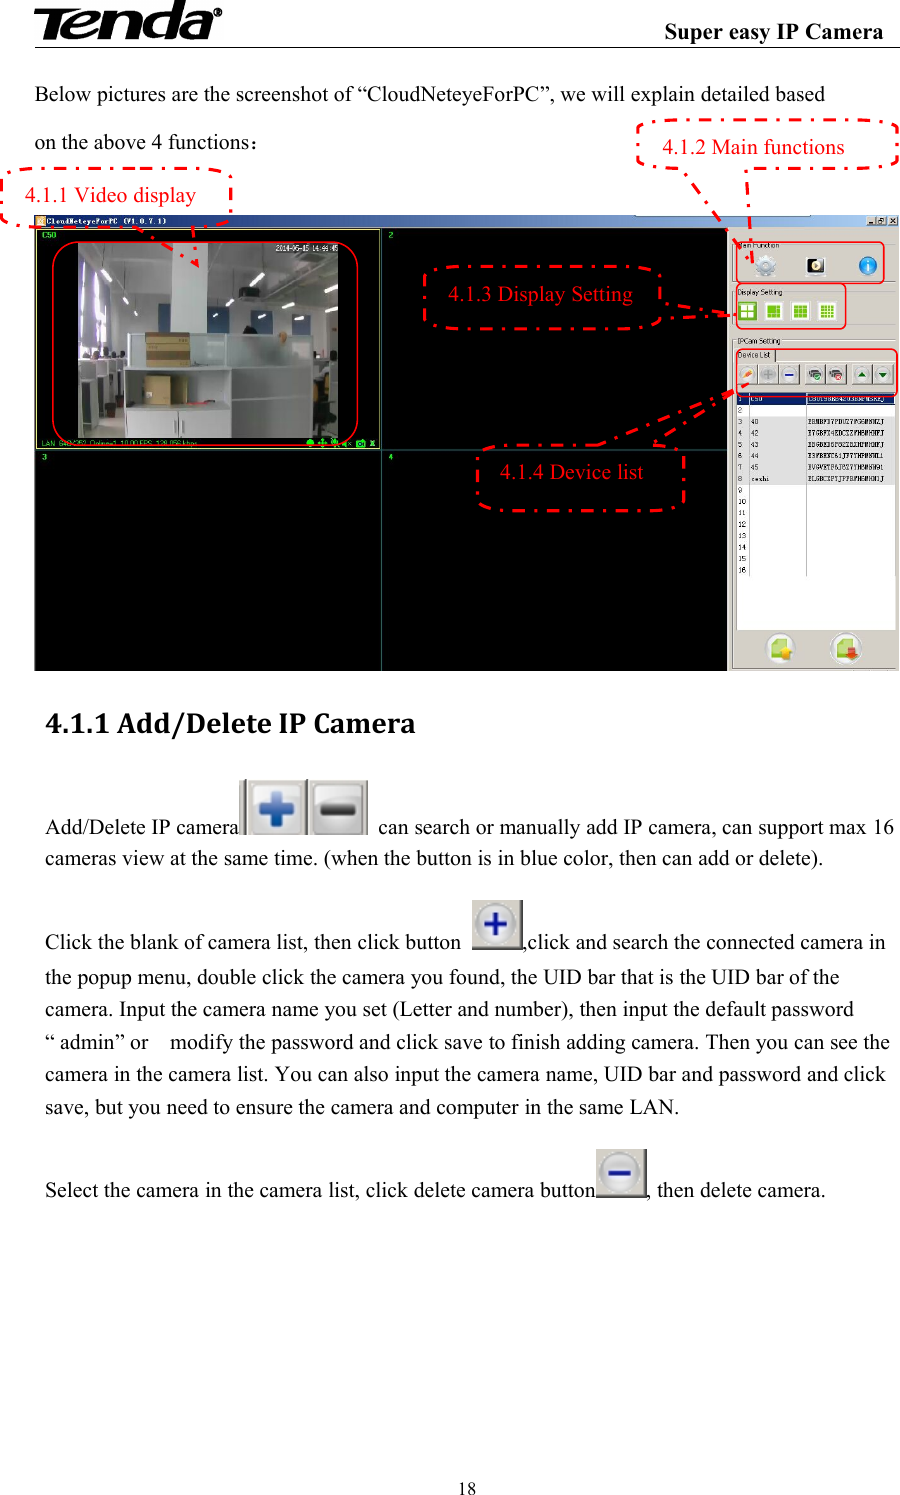 Super easy IP Camera18Below pictures are the screenshot of “CloudNeteyeForPC”, we will explain detailed basedon the above 4 functions：4.1.1 Add/Delete IP CameraAdd/Delete IP camera can search or manually add IP camera, can support max 16cameras view at the same time. (when the button is in blue color, then can add or delete).Click the blank of camera list, then click button ,click and search the connected camera inthe popup menu, double click the camera you found, the UID bar that is the UID bar of thecamera. Input the camera name you set (Letter and number), then input the default password“ admin” or modify the password and click save to finish adding camera. Then you can see thecamera in the camera list. You can also input the camera name, UID bar and password and clicksave, but you need to ensure the camera and computer in the same LAN.Select the camera in the camera list, click delete camera button , then delete camera.4.1.1 Video display4.1.2 Main functions4.1.3 Display Setting4.1.4 Device list